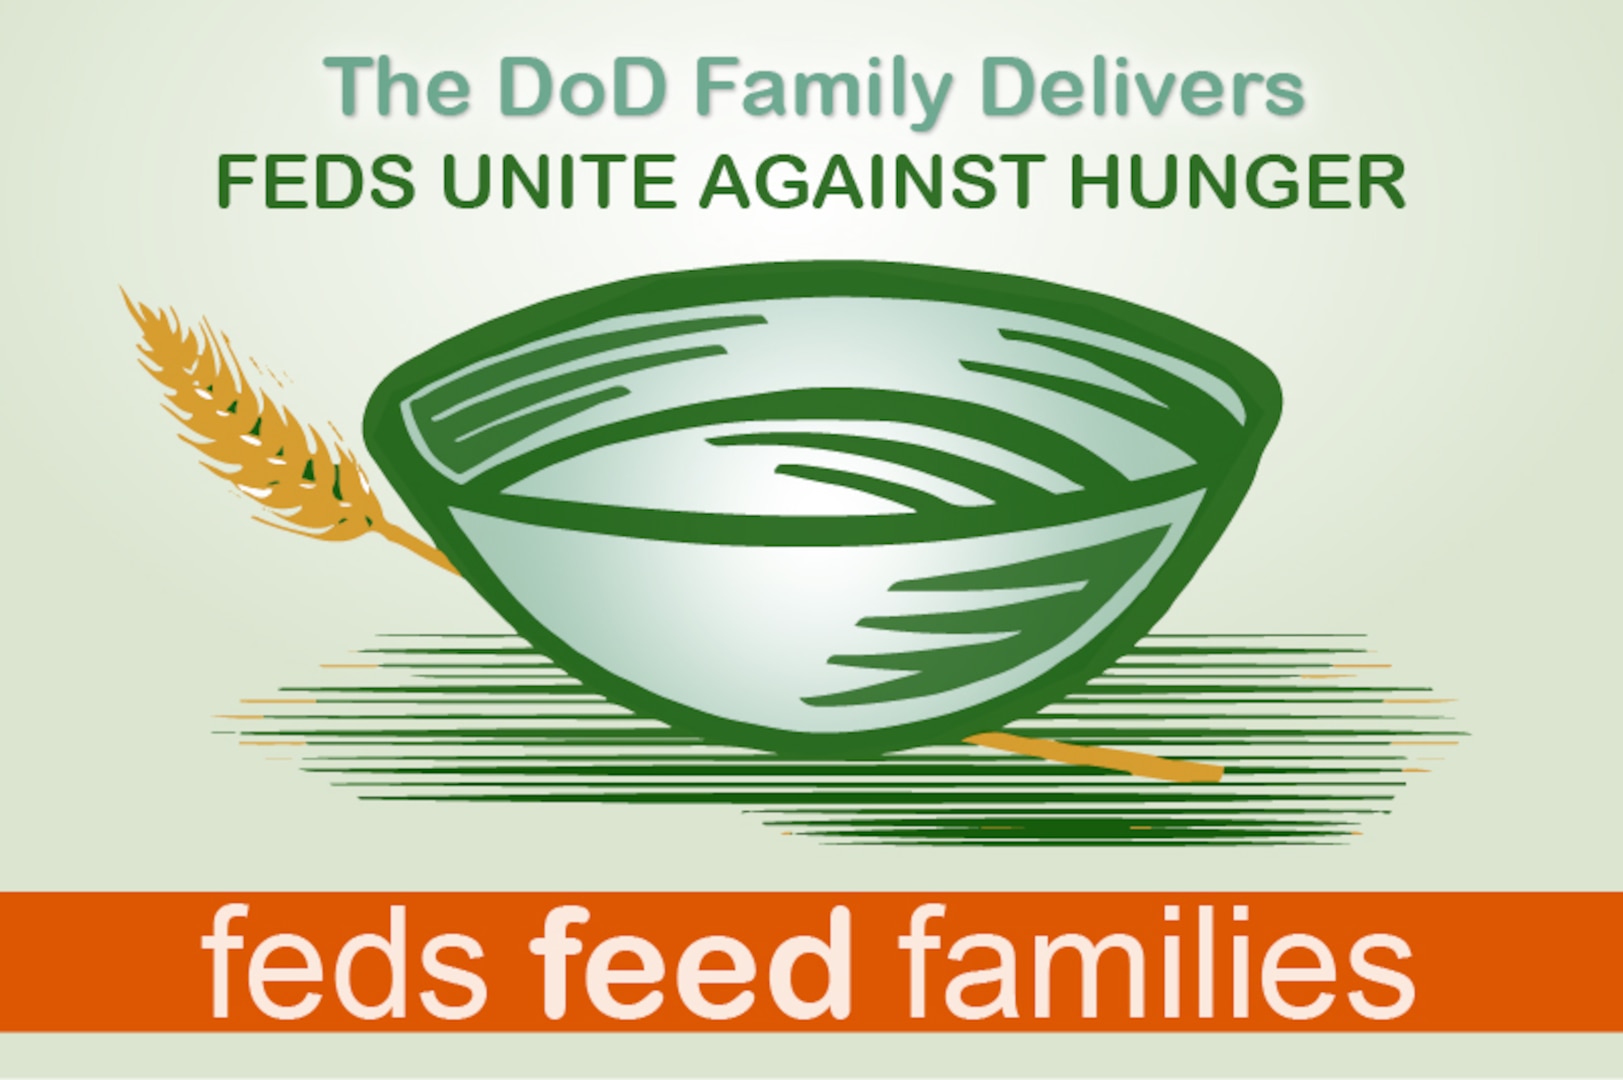 The U.S. Department of Agriculture has launched the ninth annual Feds Feed Families campaign, which extends throughout the government. The Defense Department will play a vital role in the fight against hunger.